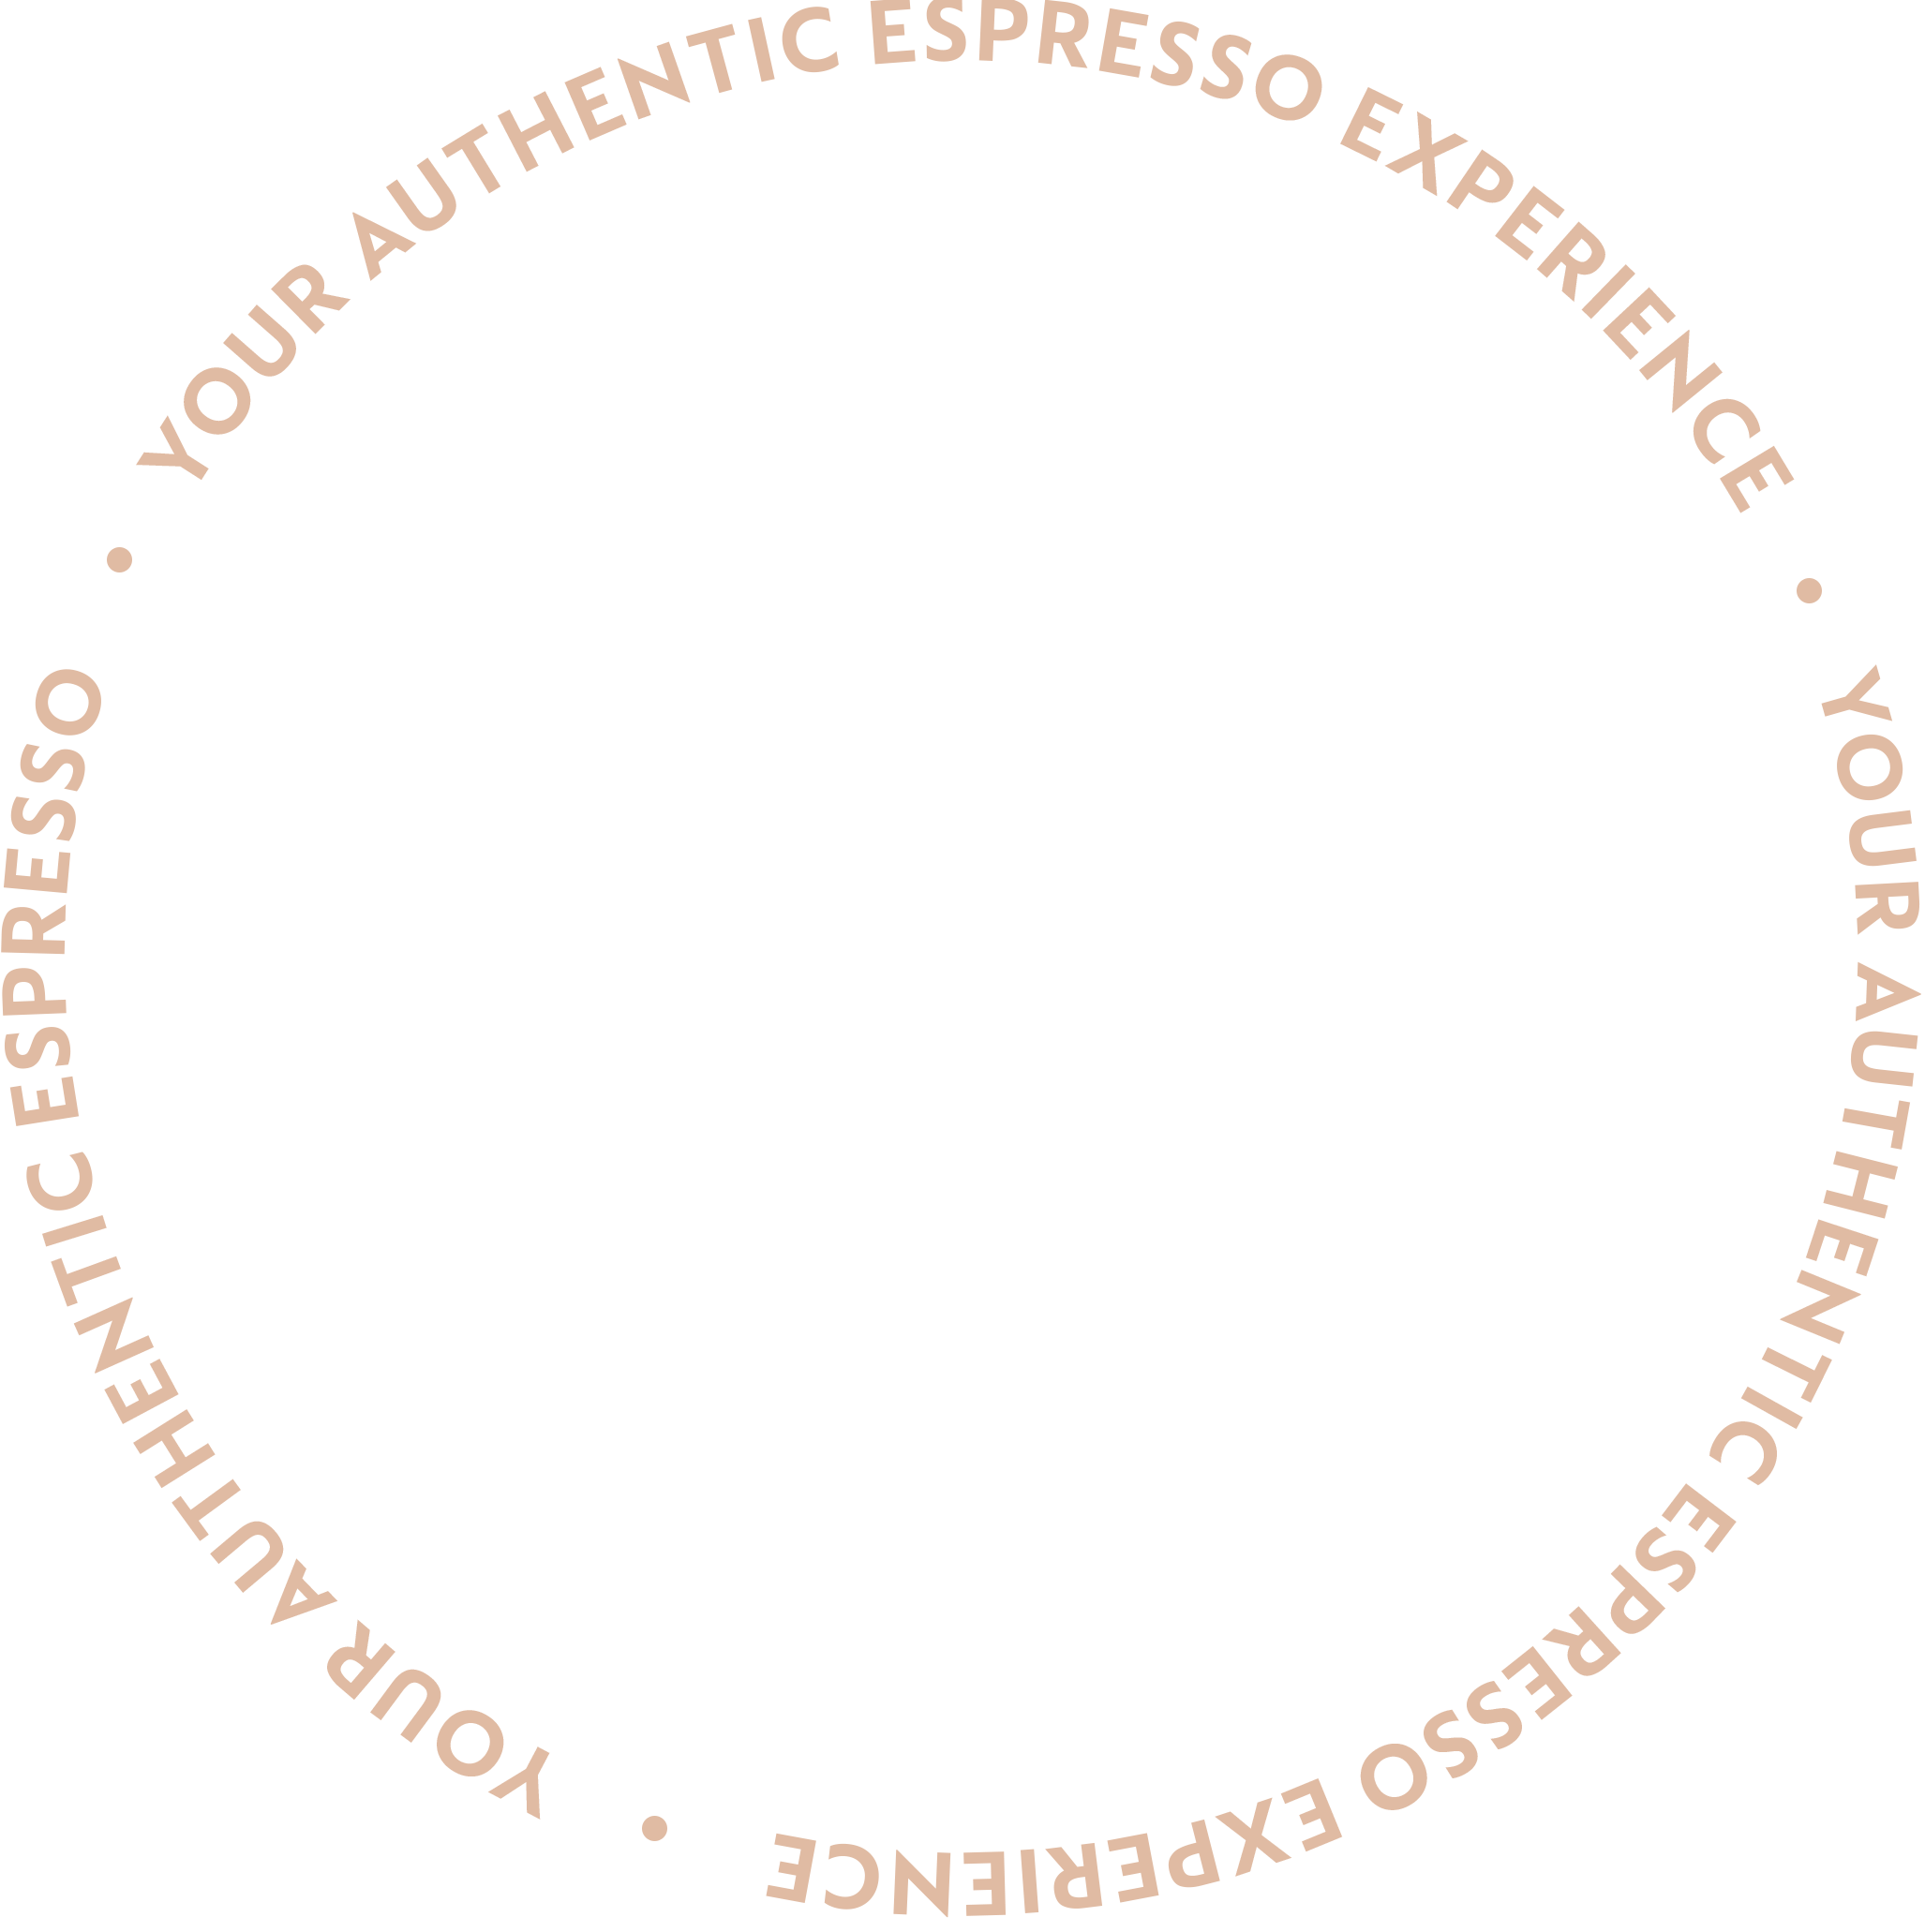 your authentic espresso experience